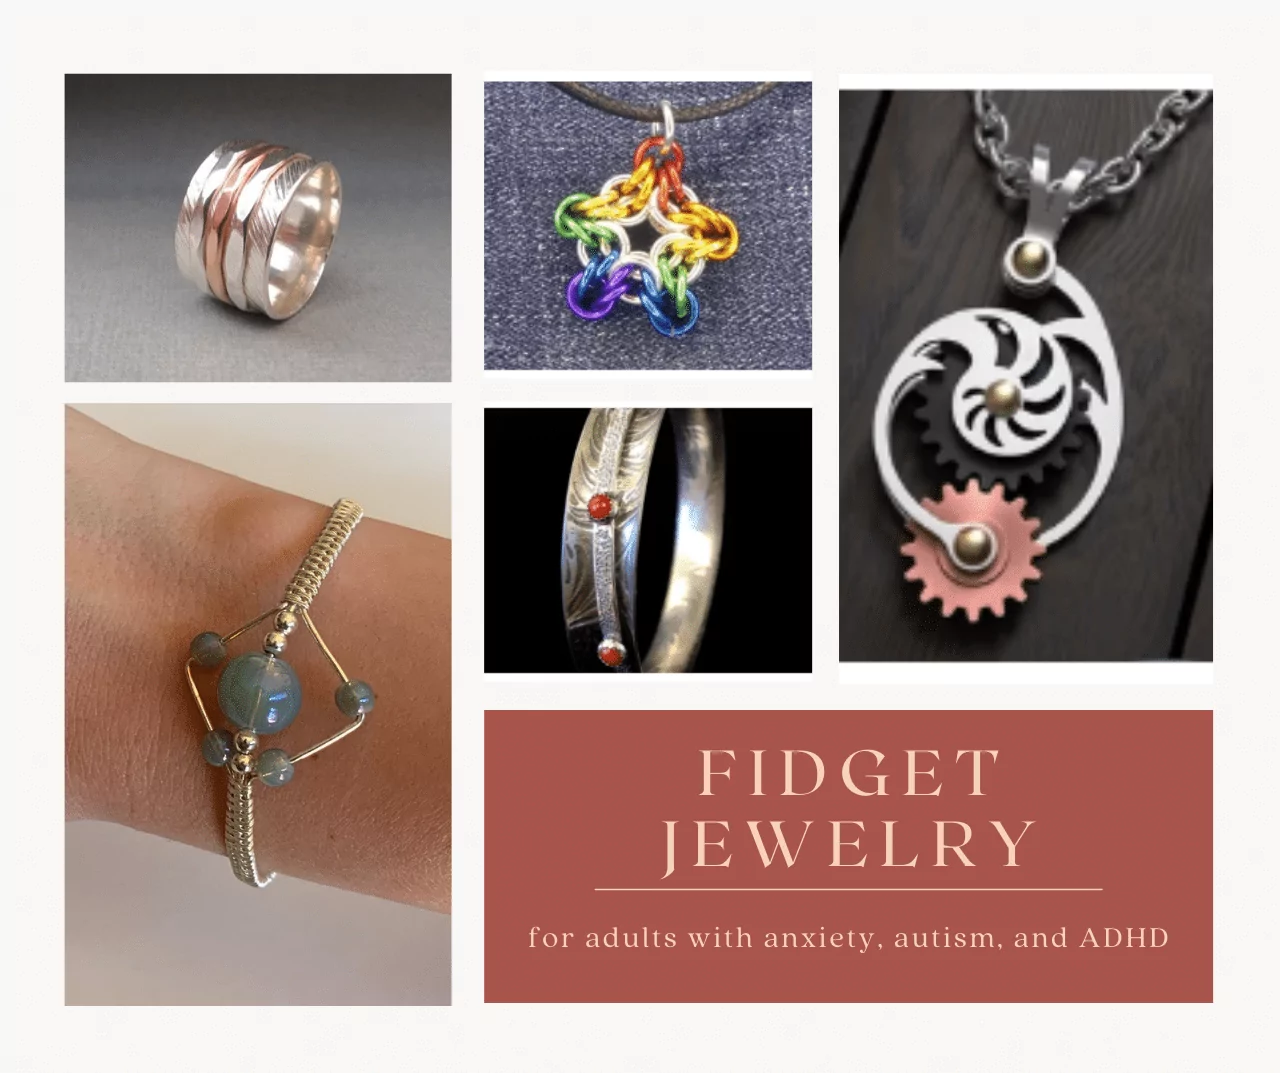 Fidget jewelry for neurodiverse adults with autism, ADHD, anxiety, and sensory needs.